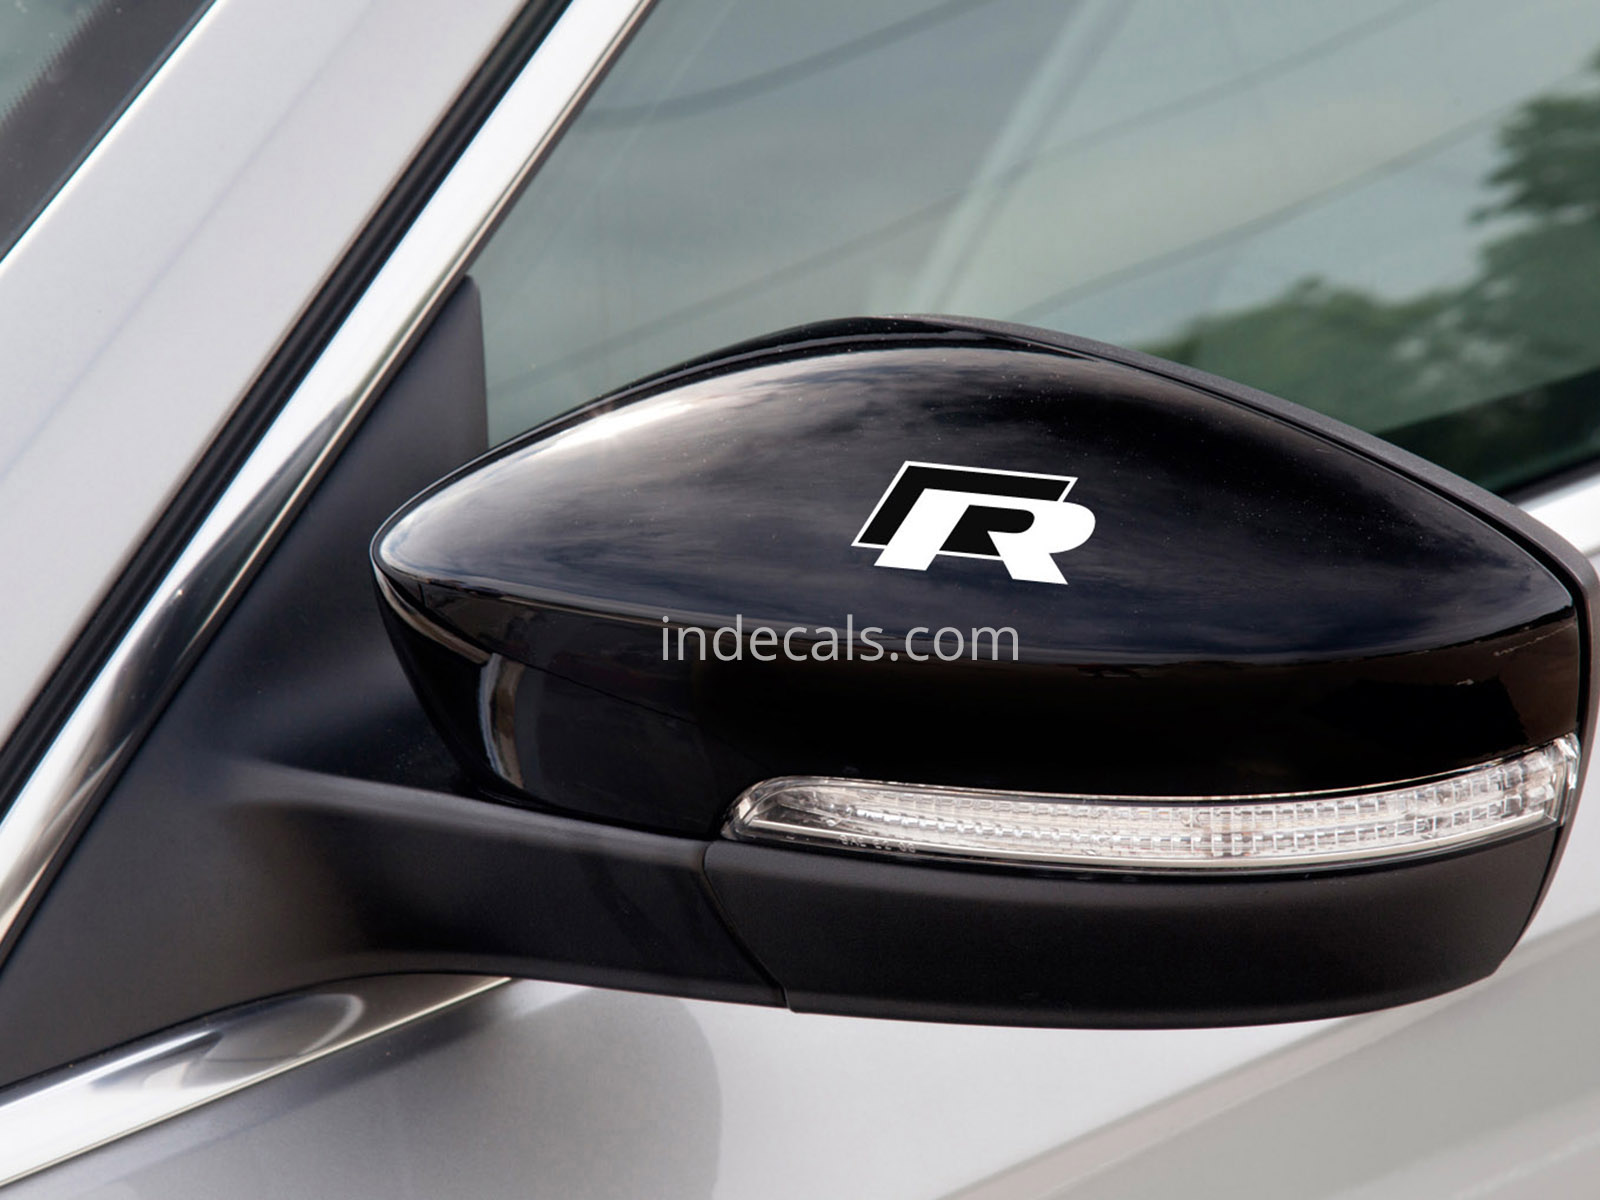 2 x Volkswagen R-Line stickers for Mirror Cover